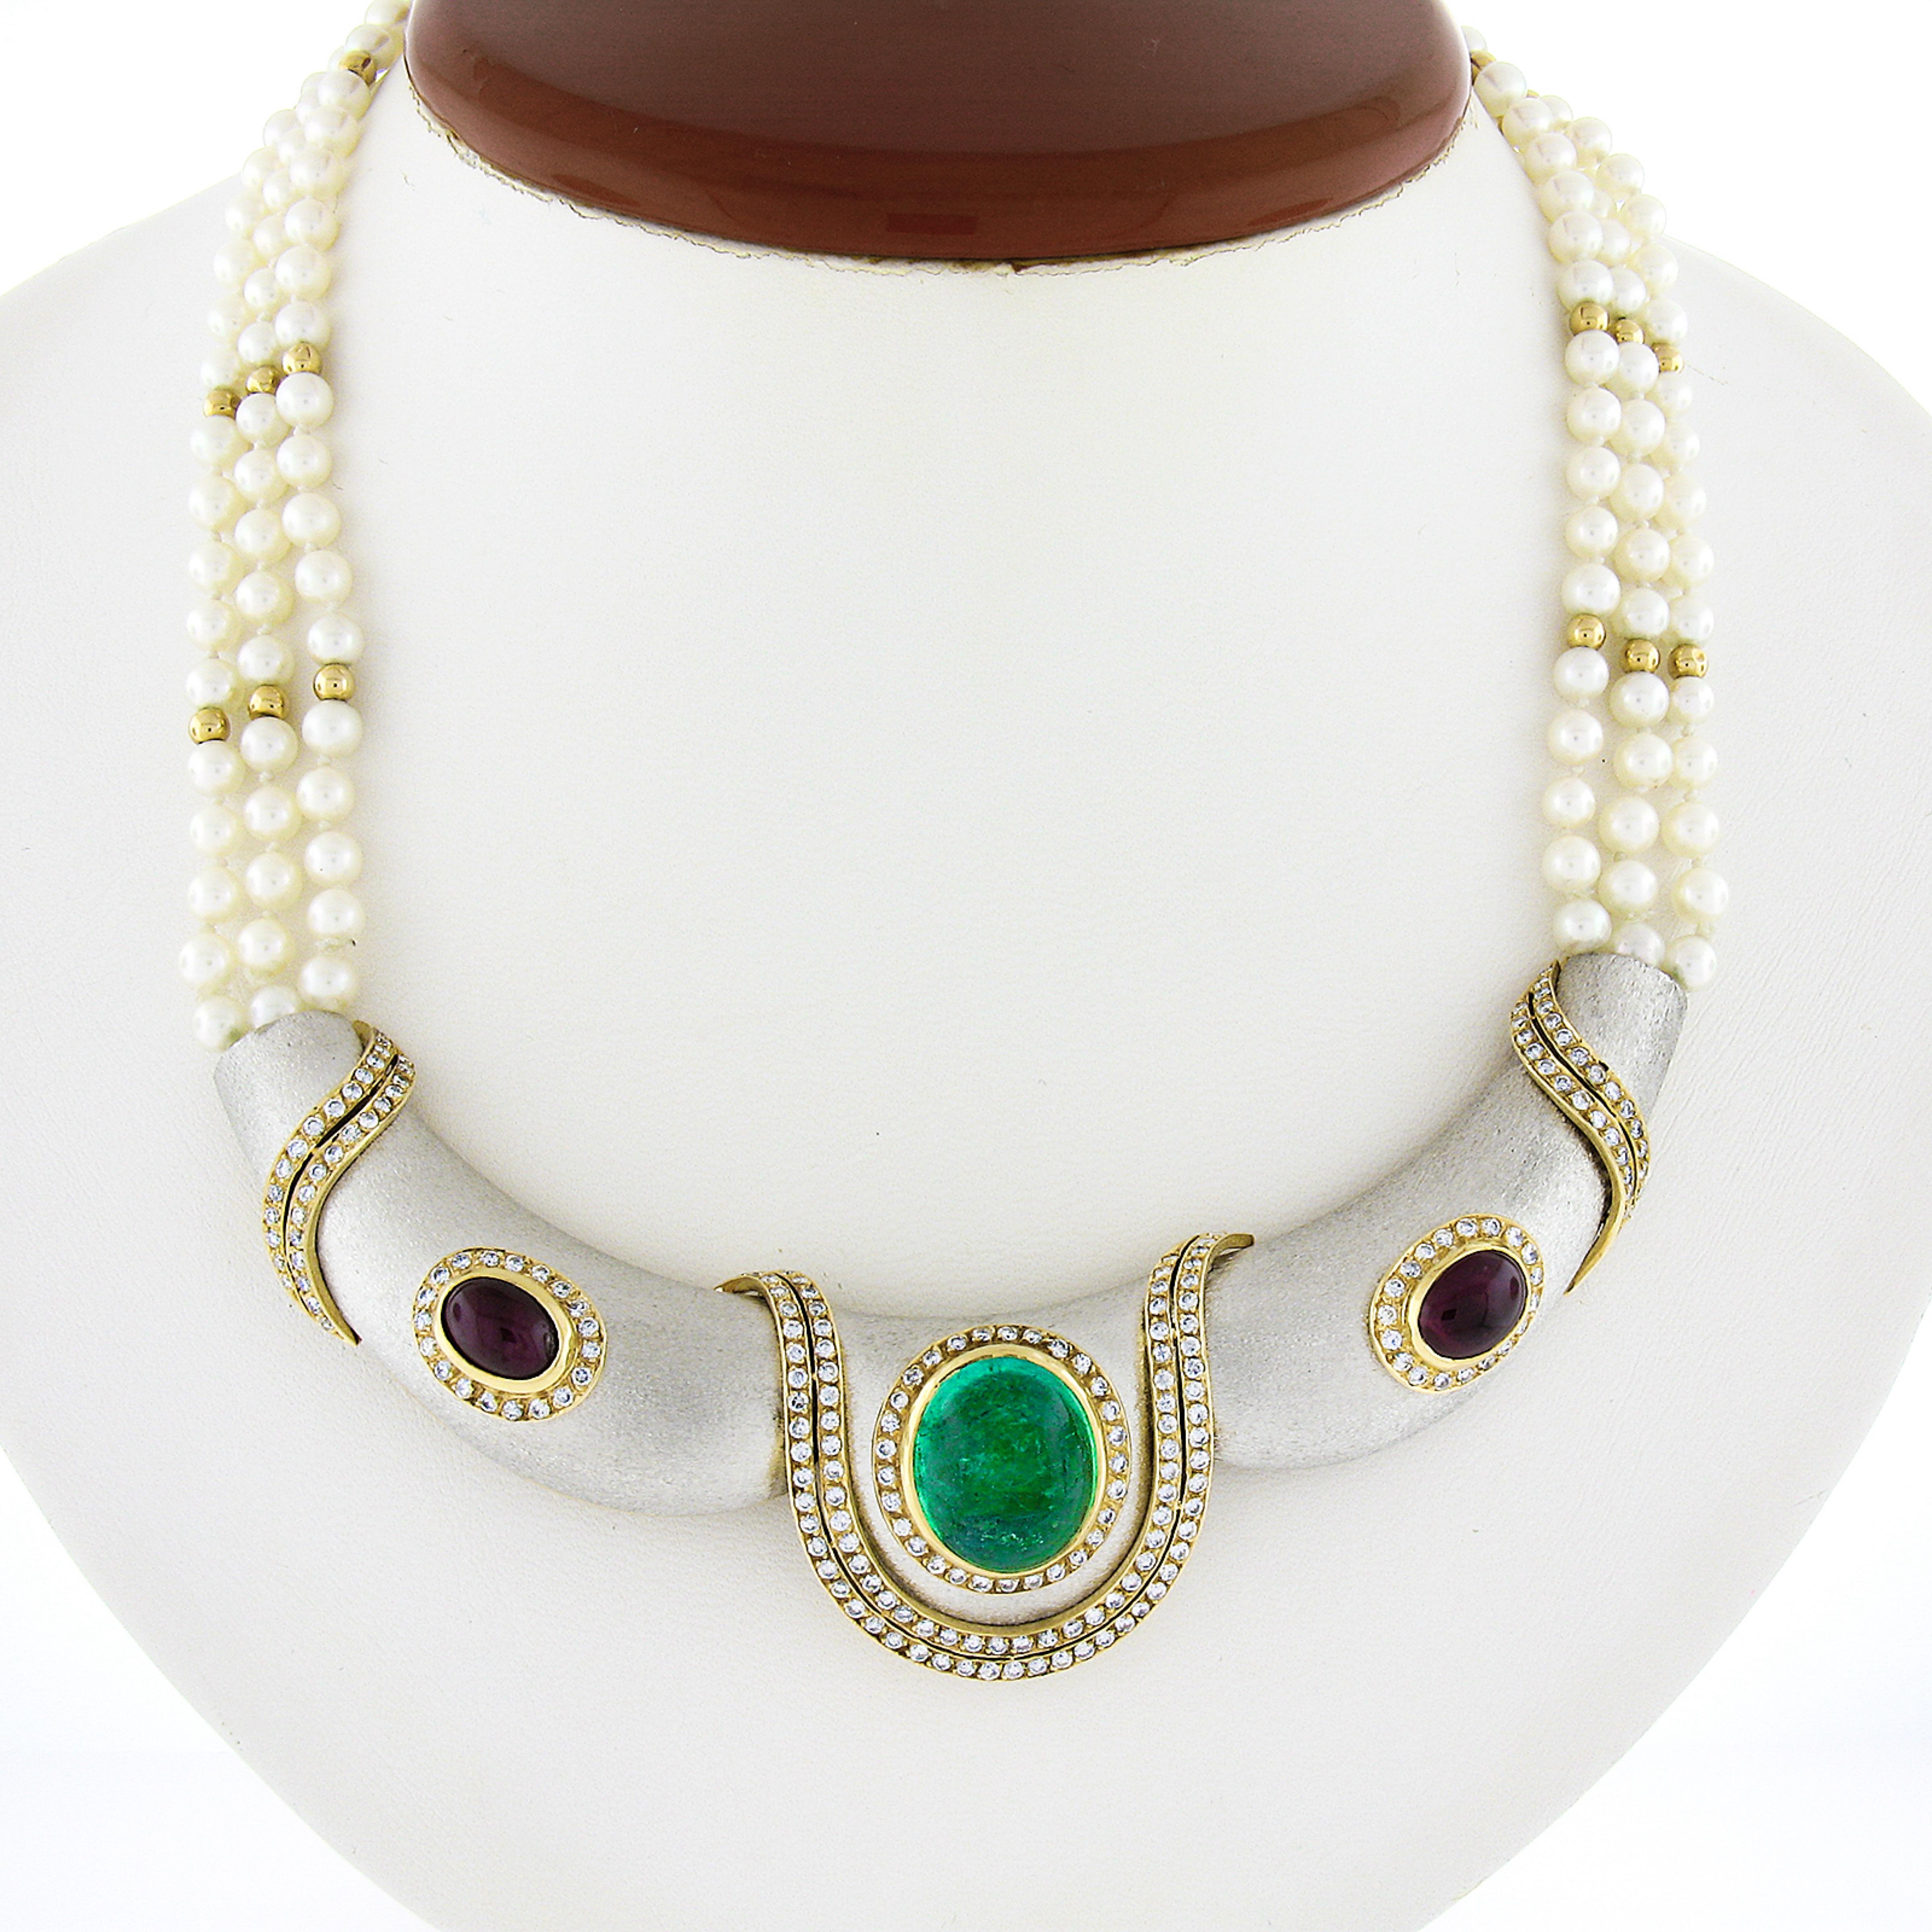 This fancy statement collar necklace is crafted in solid 18k white and yellow gold and features a truly mesmerizing and happy green Colombian emerald bezel set at its center, decorated with frosted gold finish and further adorned with fiery diamonds